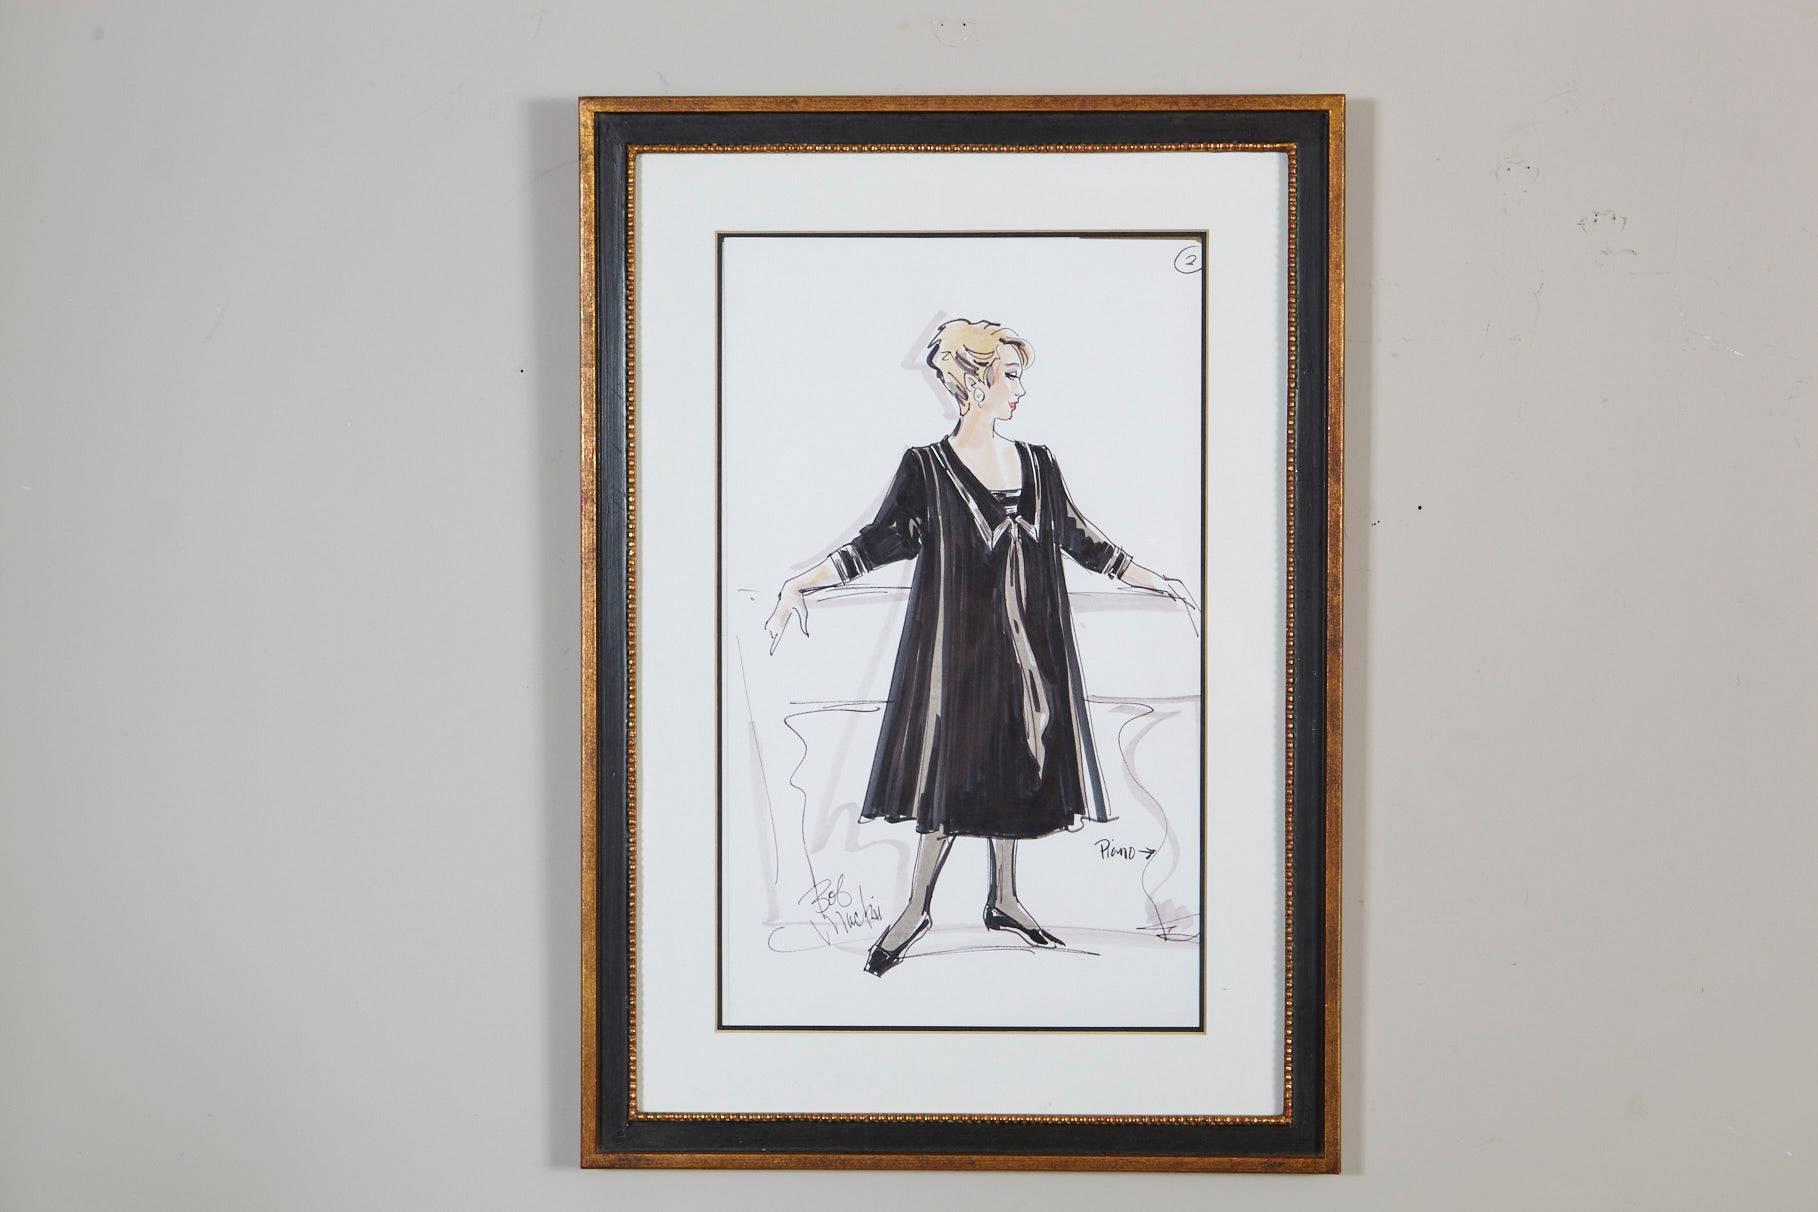 Signed Bob Mackie ink and watercolor fashion drawing of a show dress proposal for Rosemary Clooney, from the estate of Rosemary Clooney.
Framed in a black and gilded frame under glass.
This unique piece can be certified. 
This is drawing #1 of two